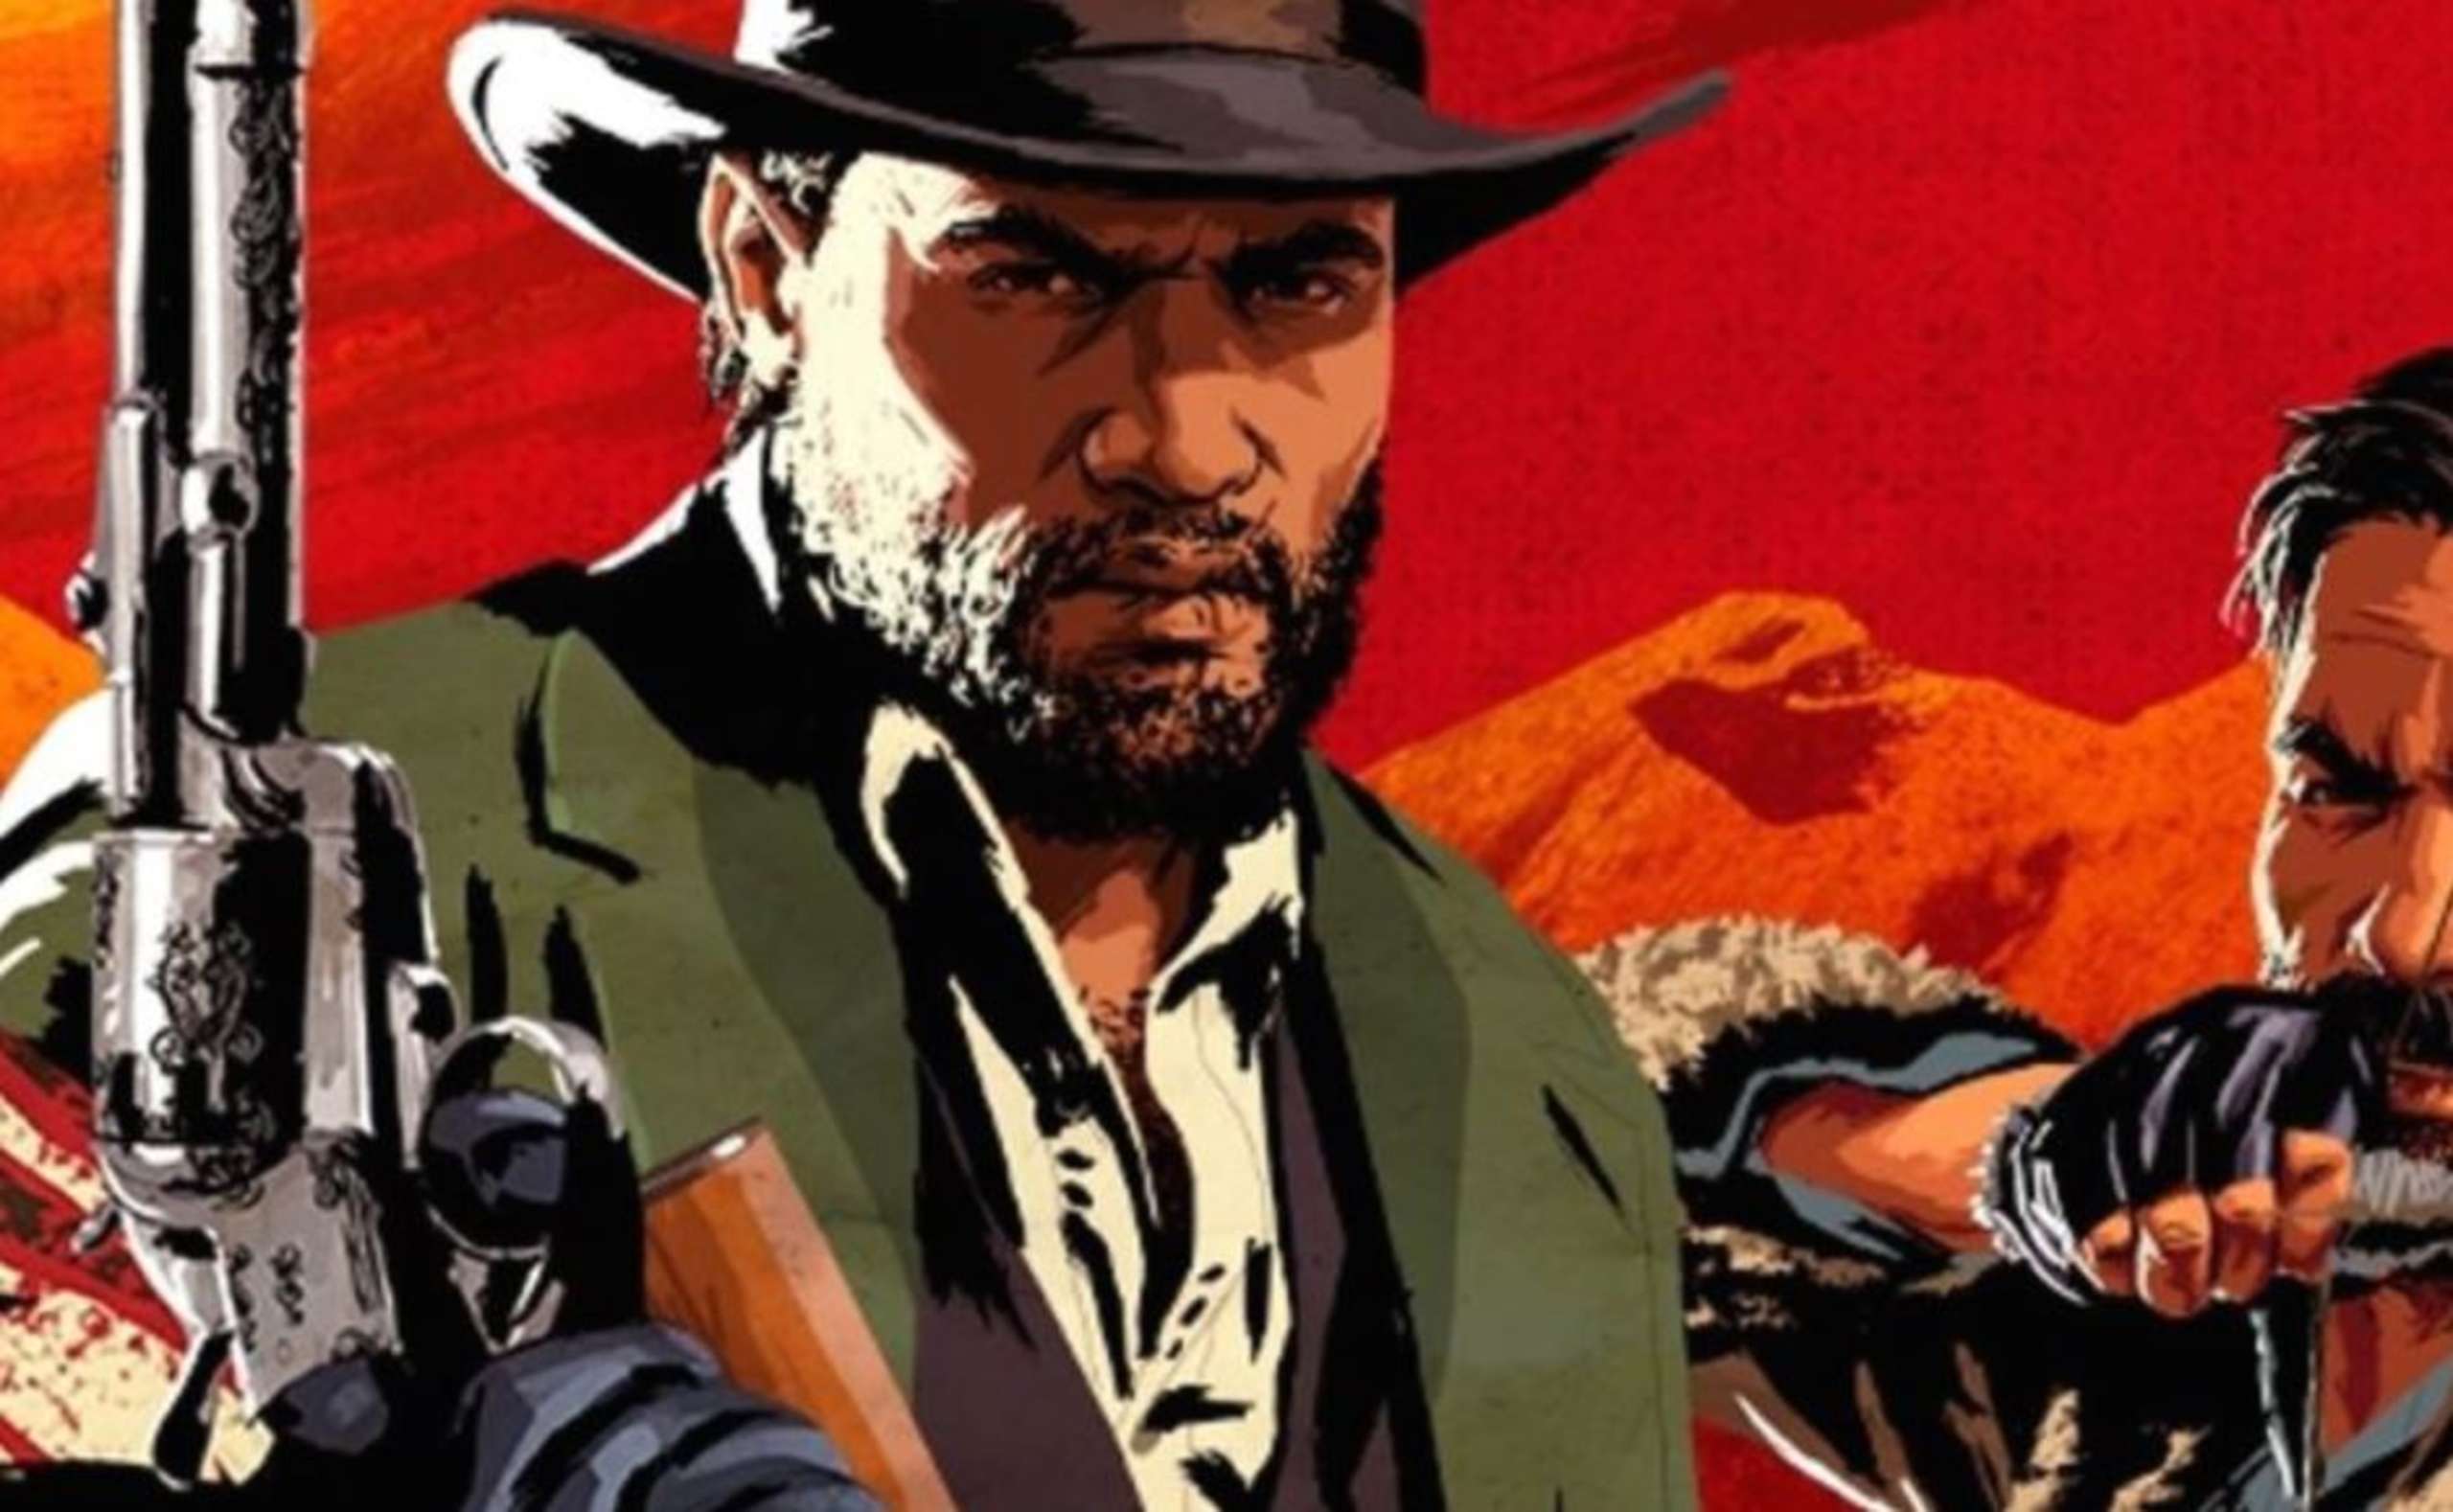 Despite Rockstar’s Lack Of Formal Announcement Of Red Dead Redemption 3, An AI Image Has Given Fans An Exciting Look At The Game’s Potential New Protagonist